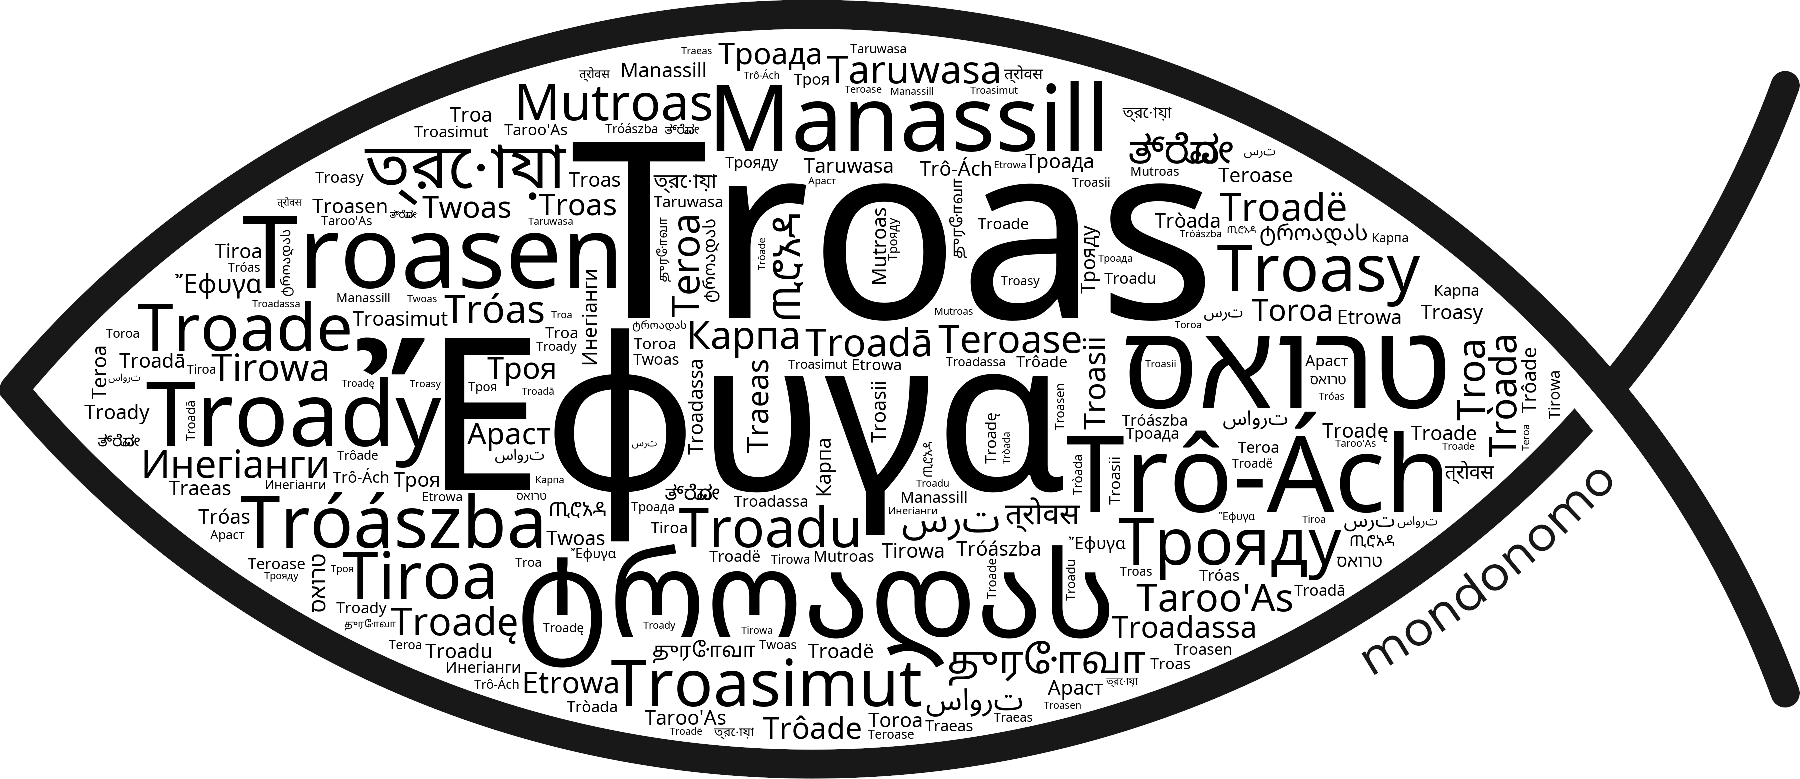 Name Troas in the world's Bibles